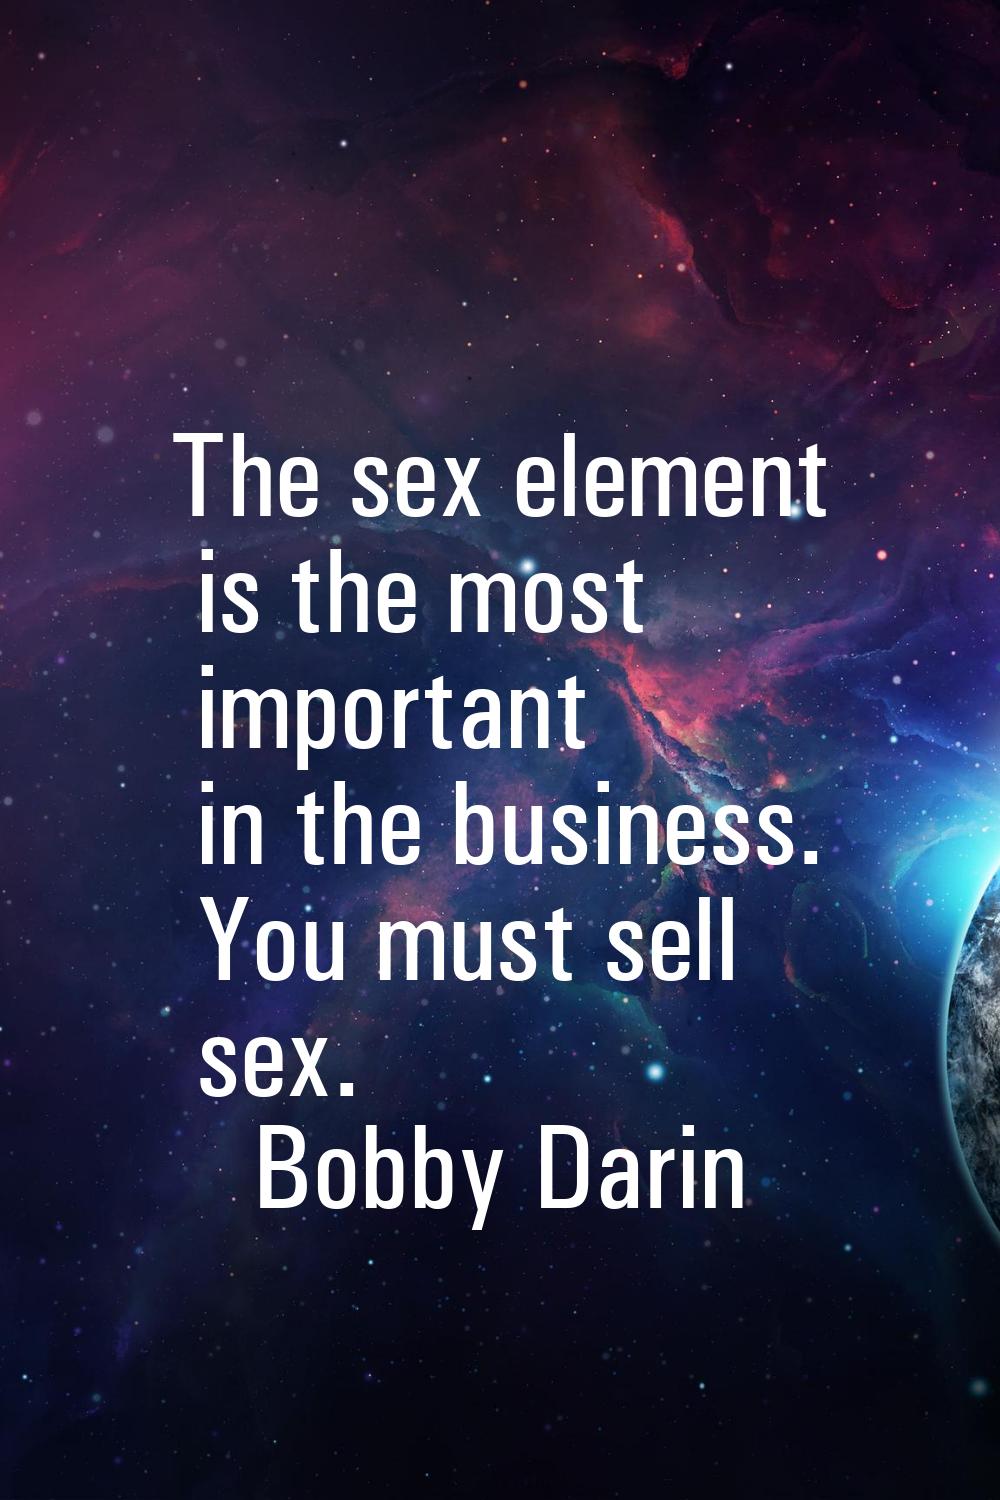 The sex element is the most important in the business. You must sell sex.